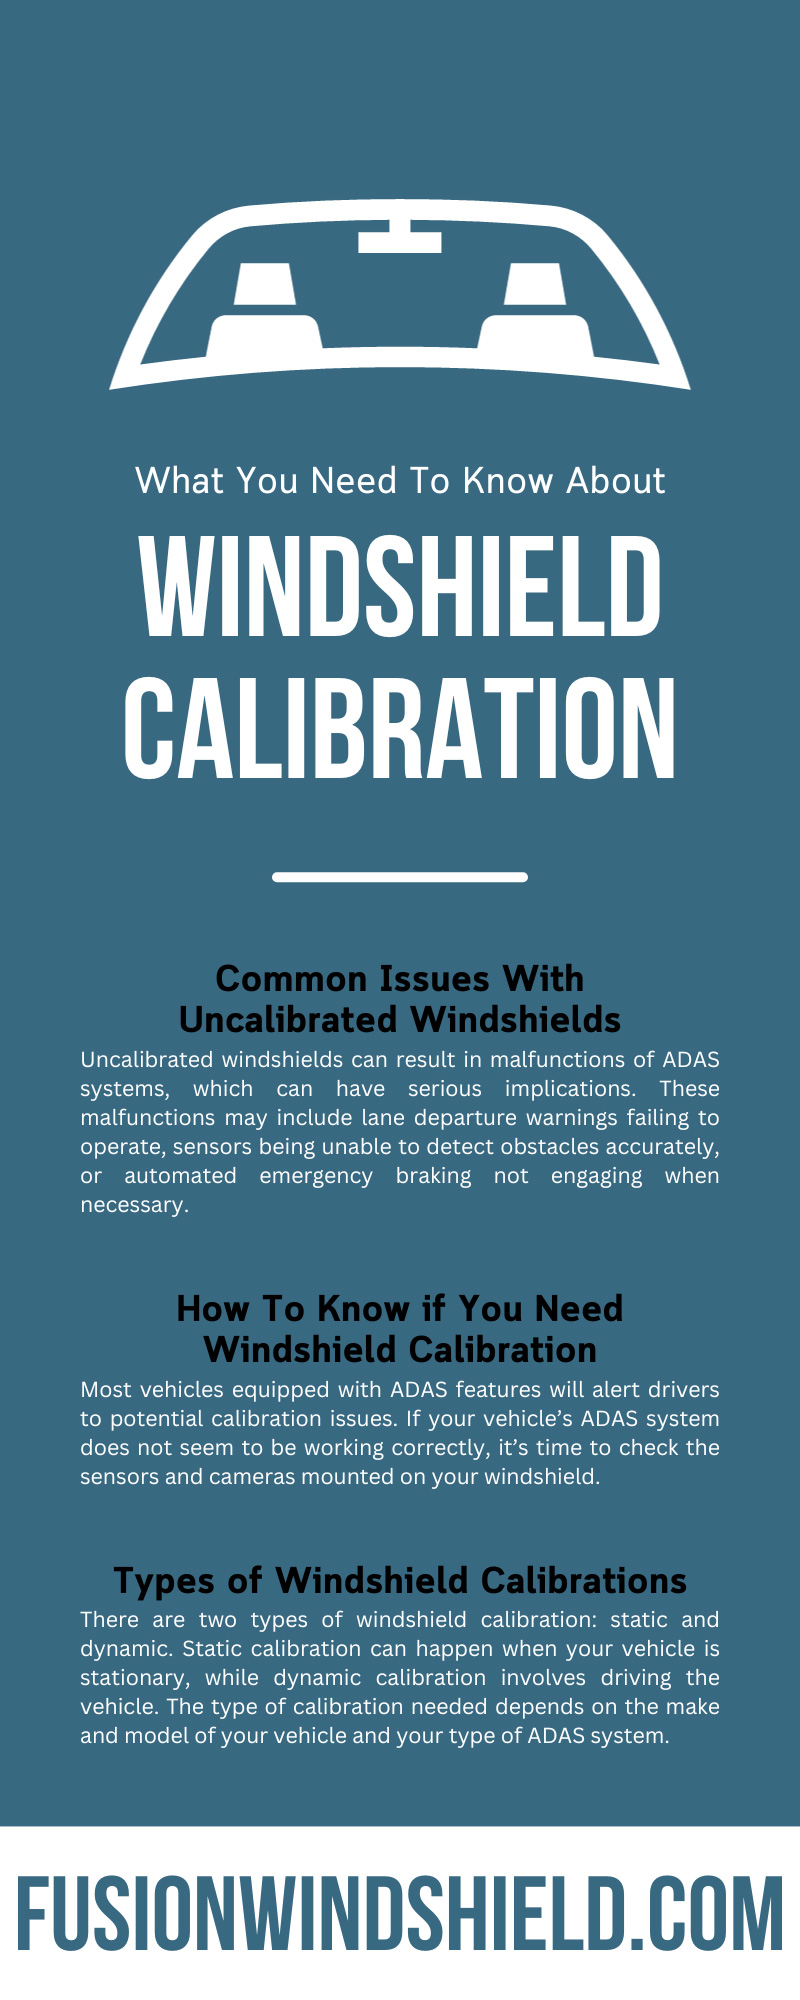 What You Need To Know About Windshield Calibration